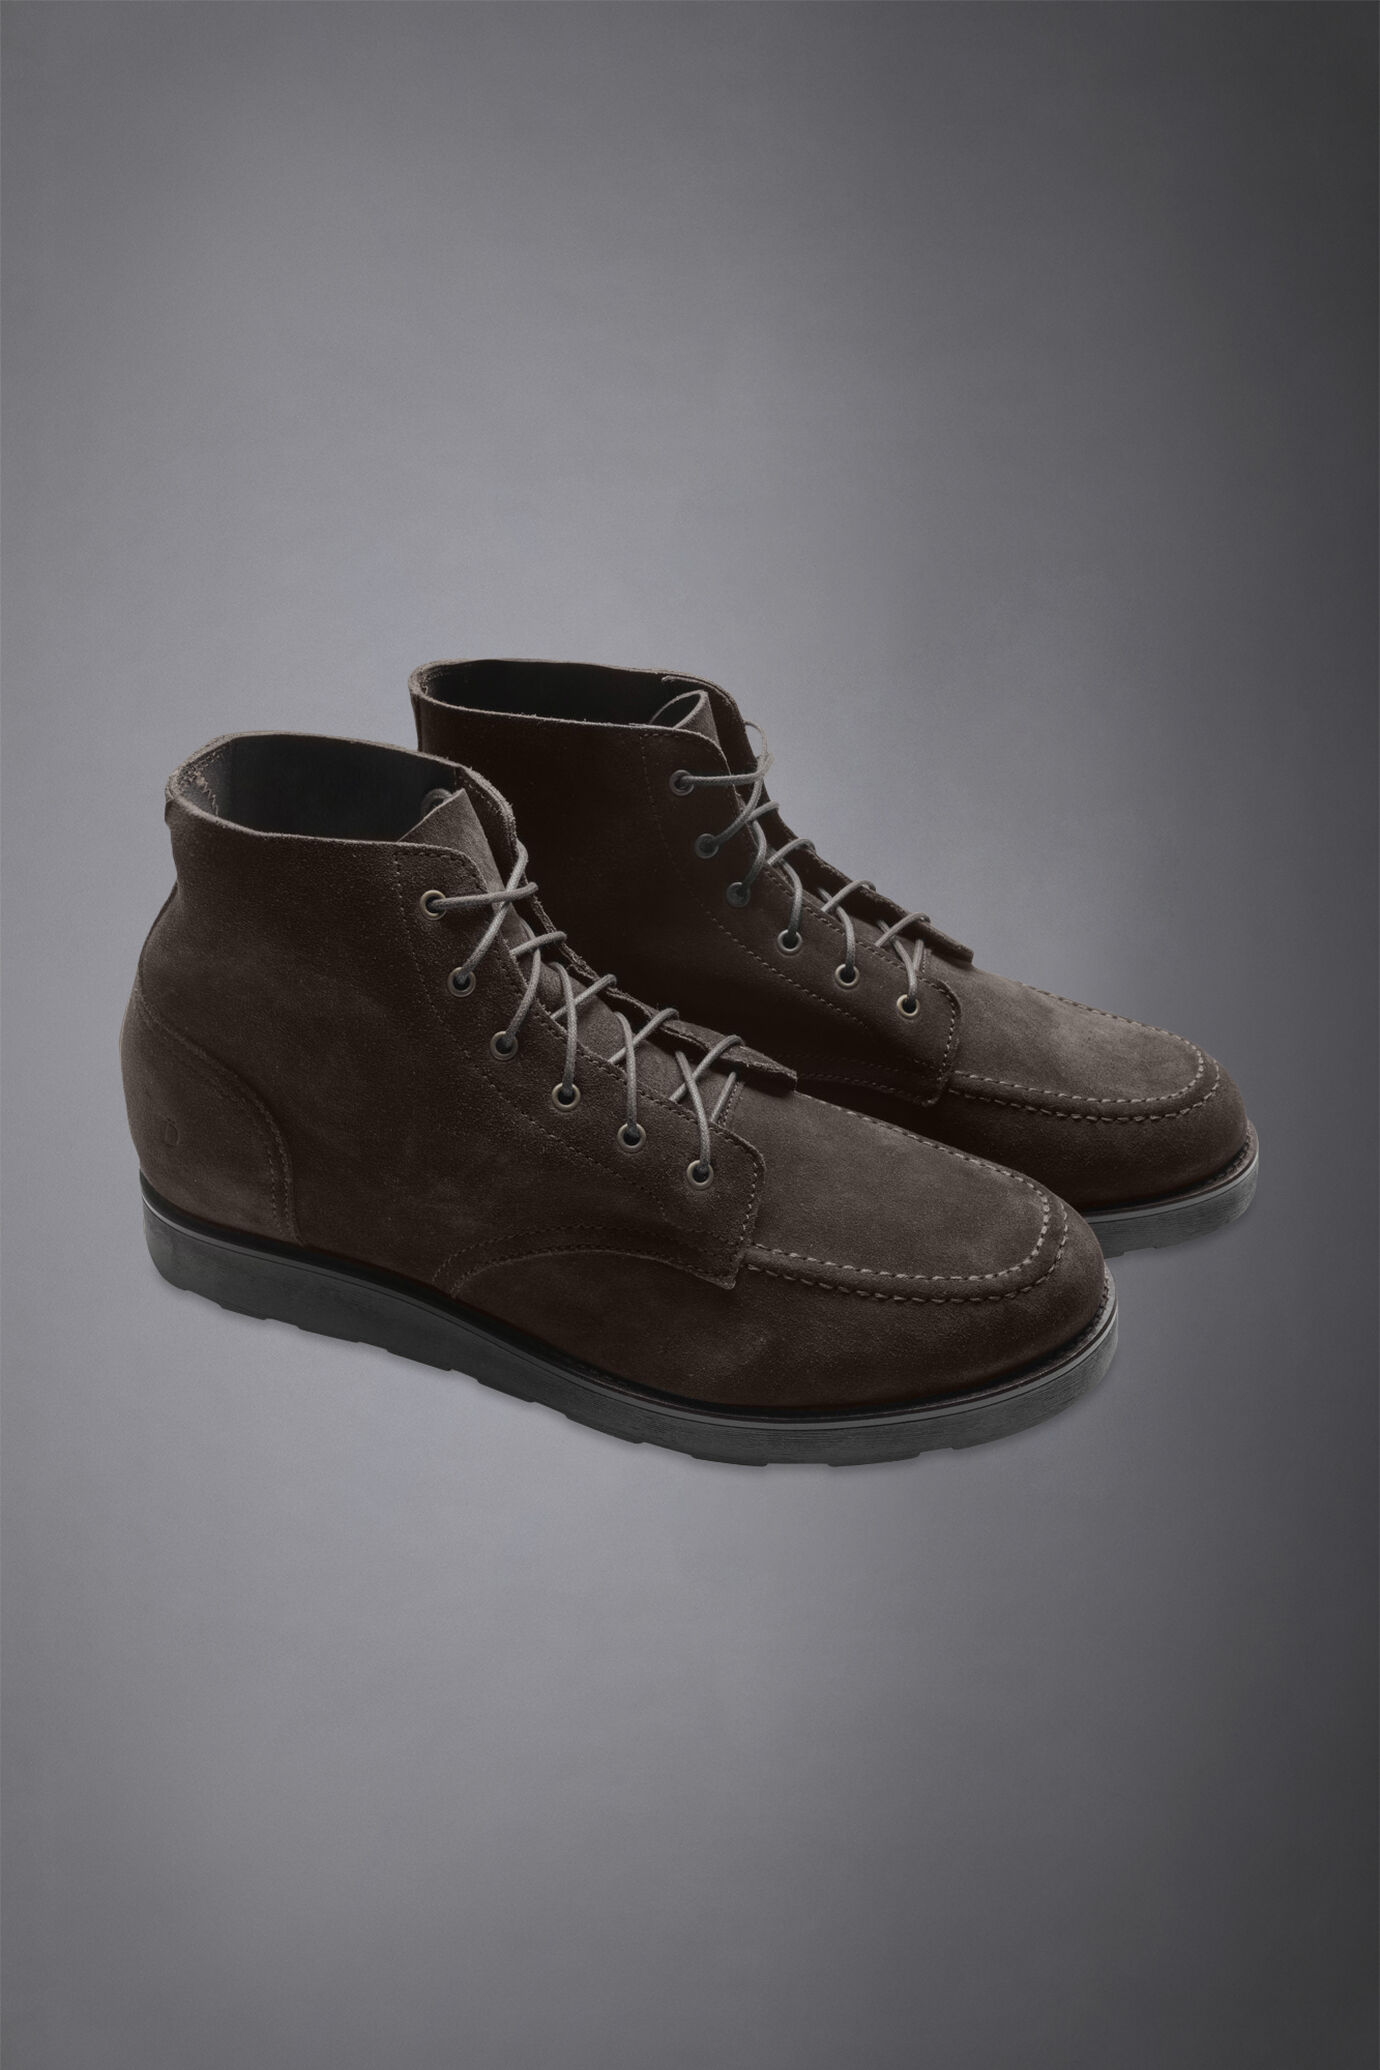 Men's 100% suede ankle boots with rubber sole